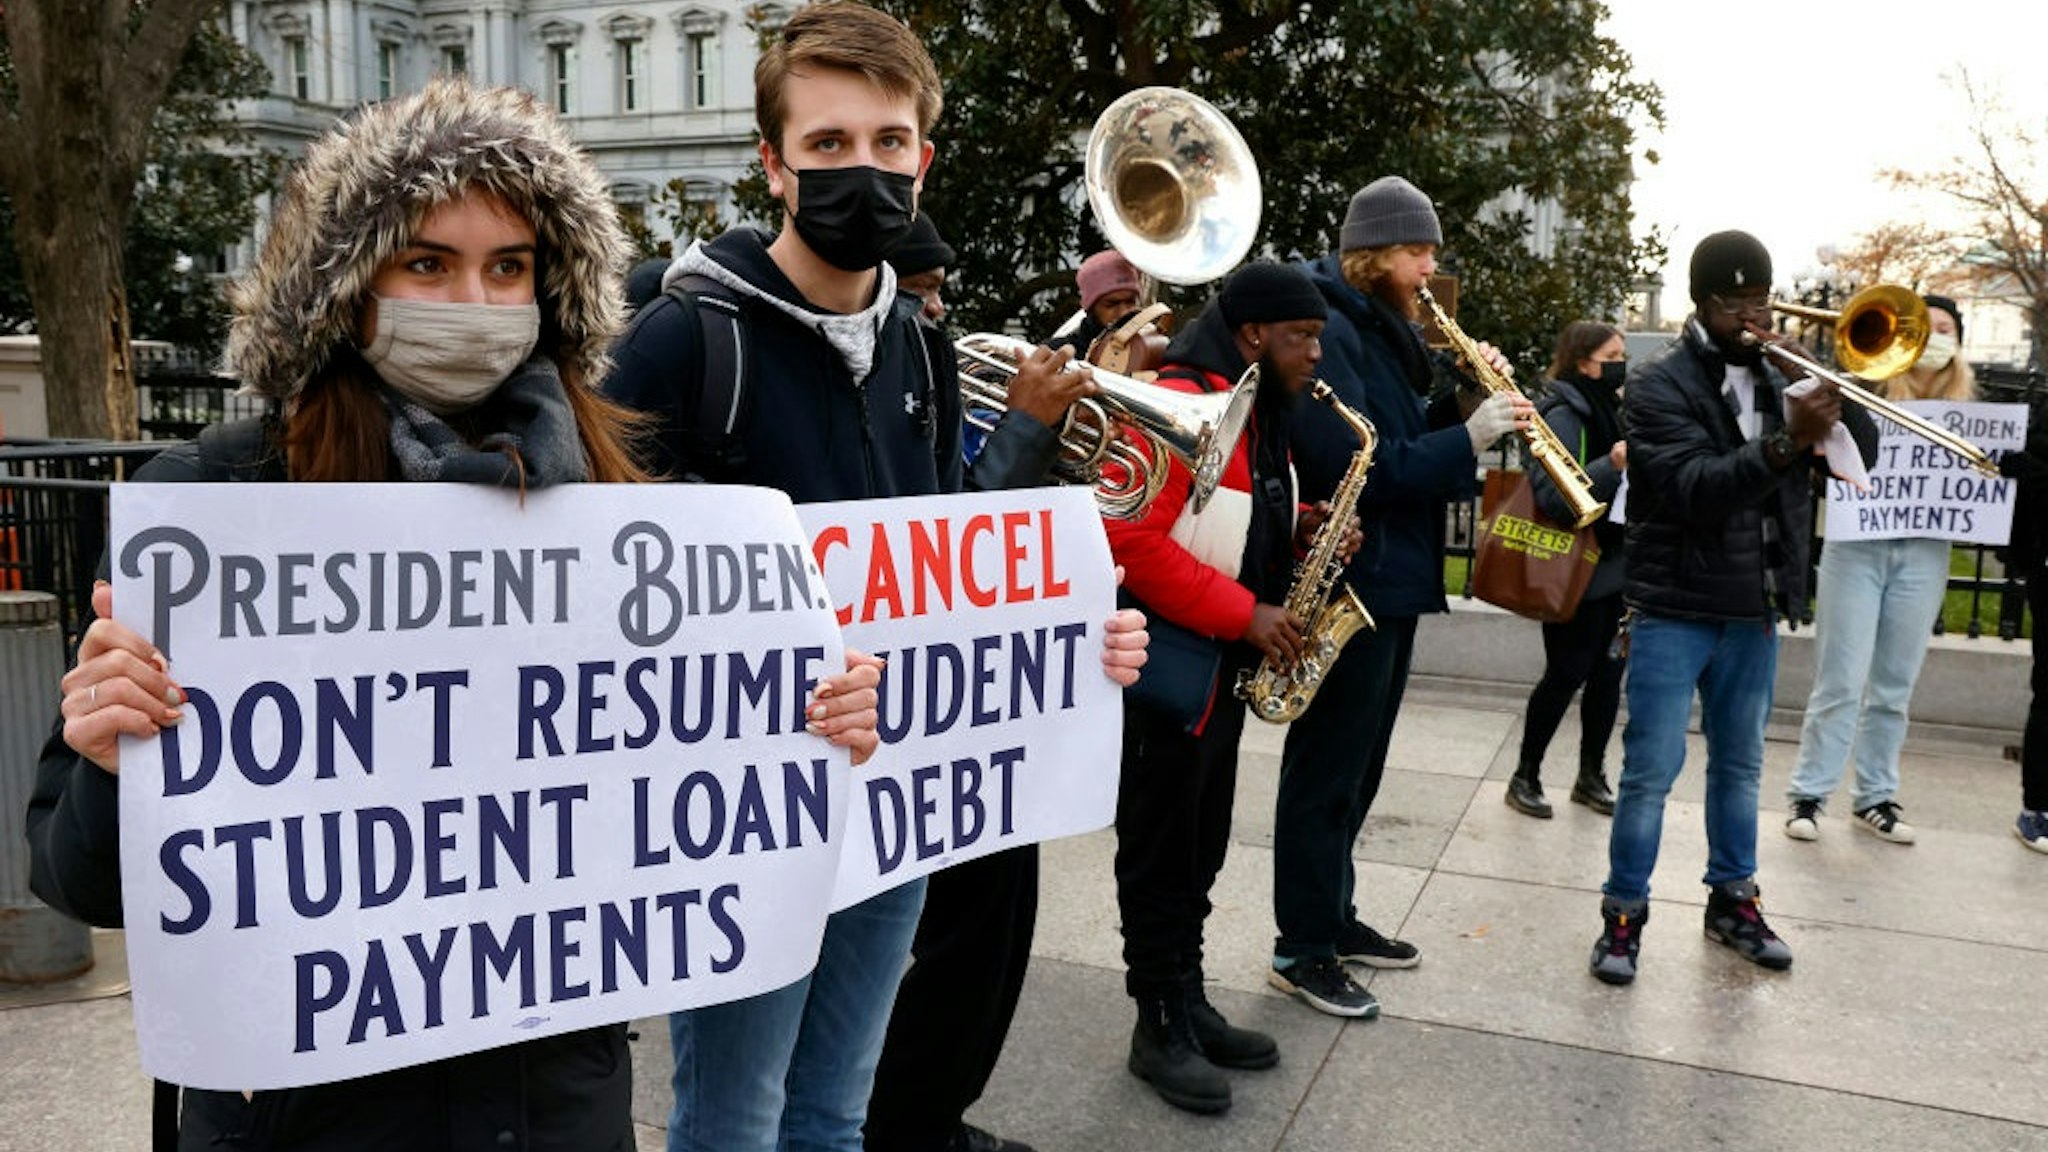 WASHINGTON, DC - DECEMBER 15: Activists and artists call on President Biden to not resume student loan payments in February and to cancel student debt near The White House on December 15, 2021 in Washington, DC.